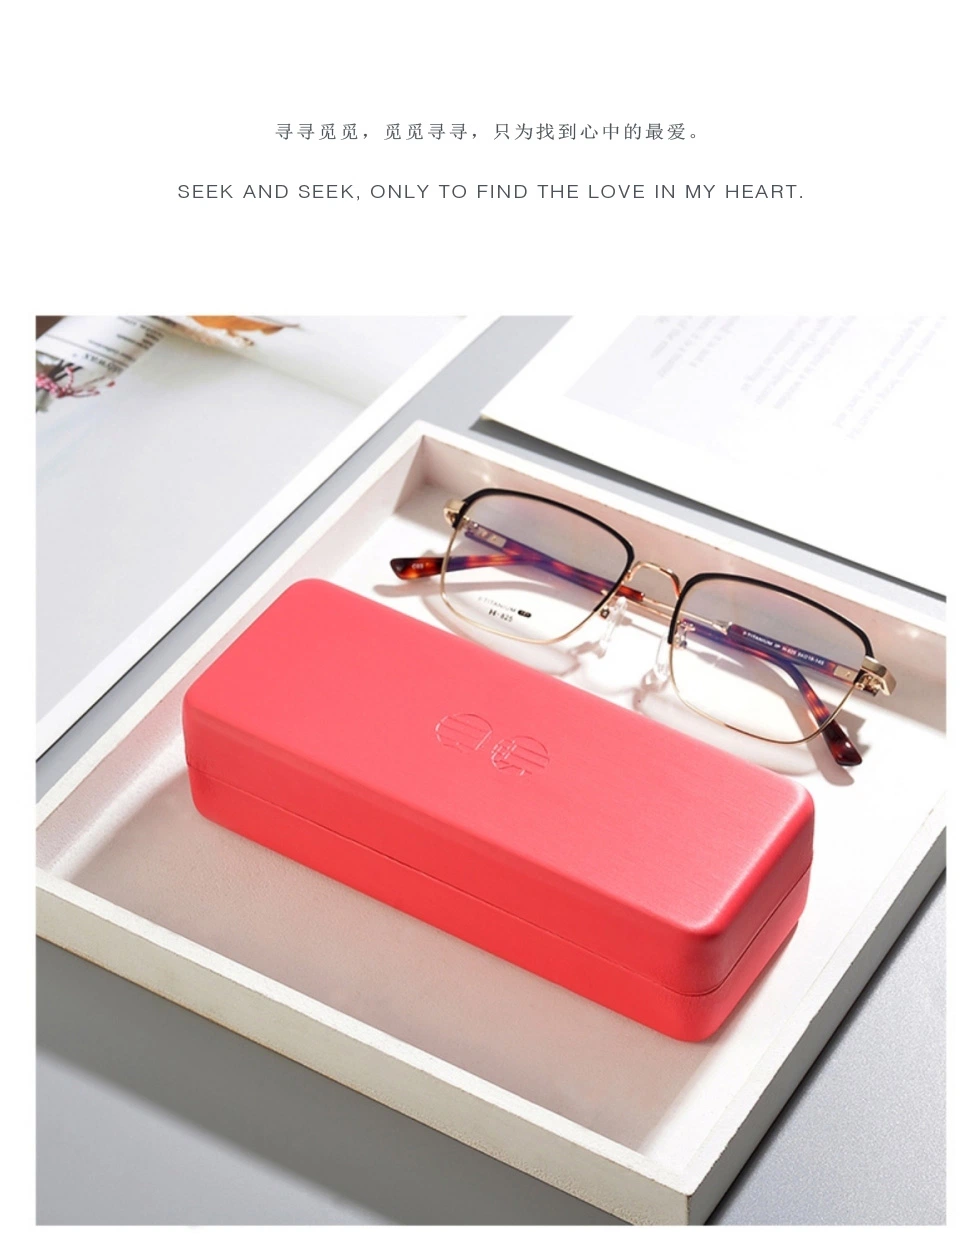 T184 Simple and Graceful Hard Glasses Case, Fit for Reading Glassesinno-T184 Simple and Graceful Hard Glasses Case, Fit for Reading Glasses and S and Sunglasses